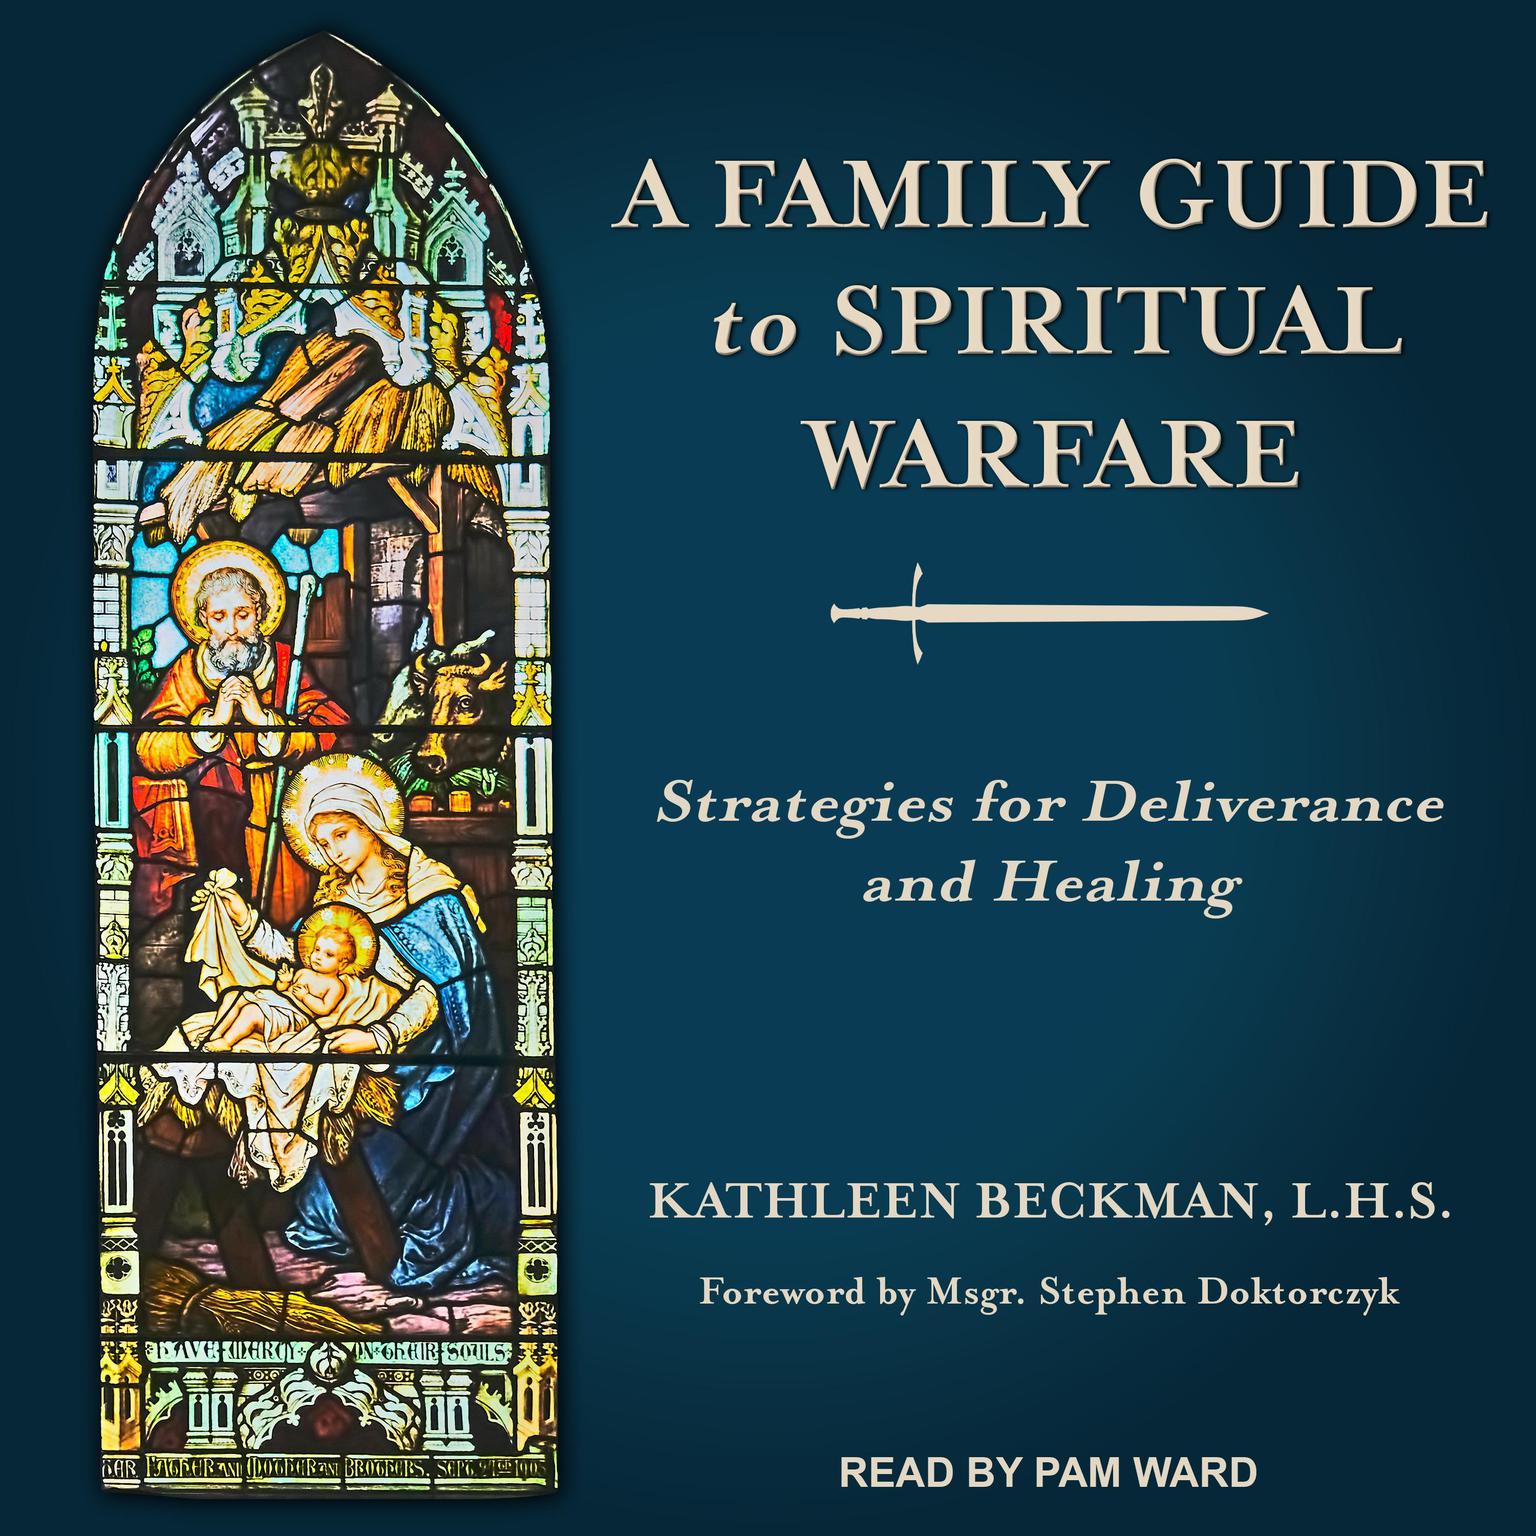 A Family Guide to Spiritual Warfare: Strategies for Deliverance and Healing Audiobook, by Kathleen Beckman